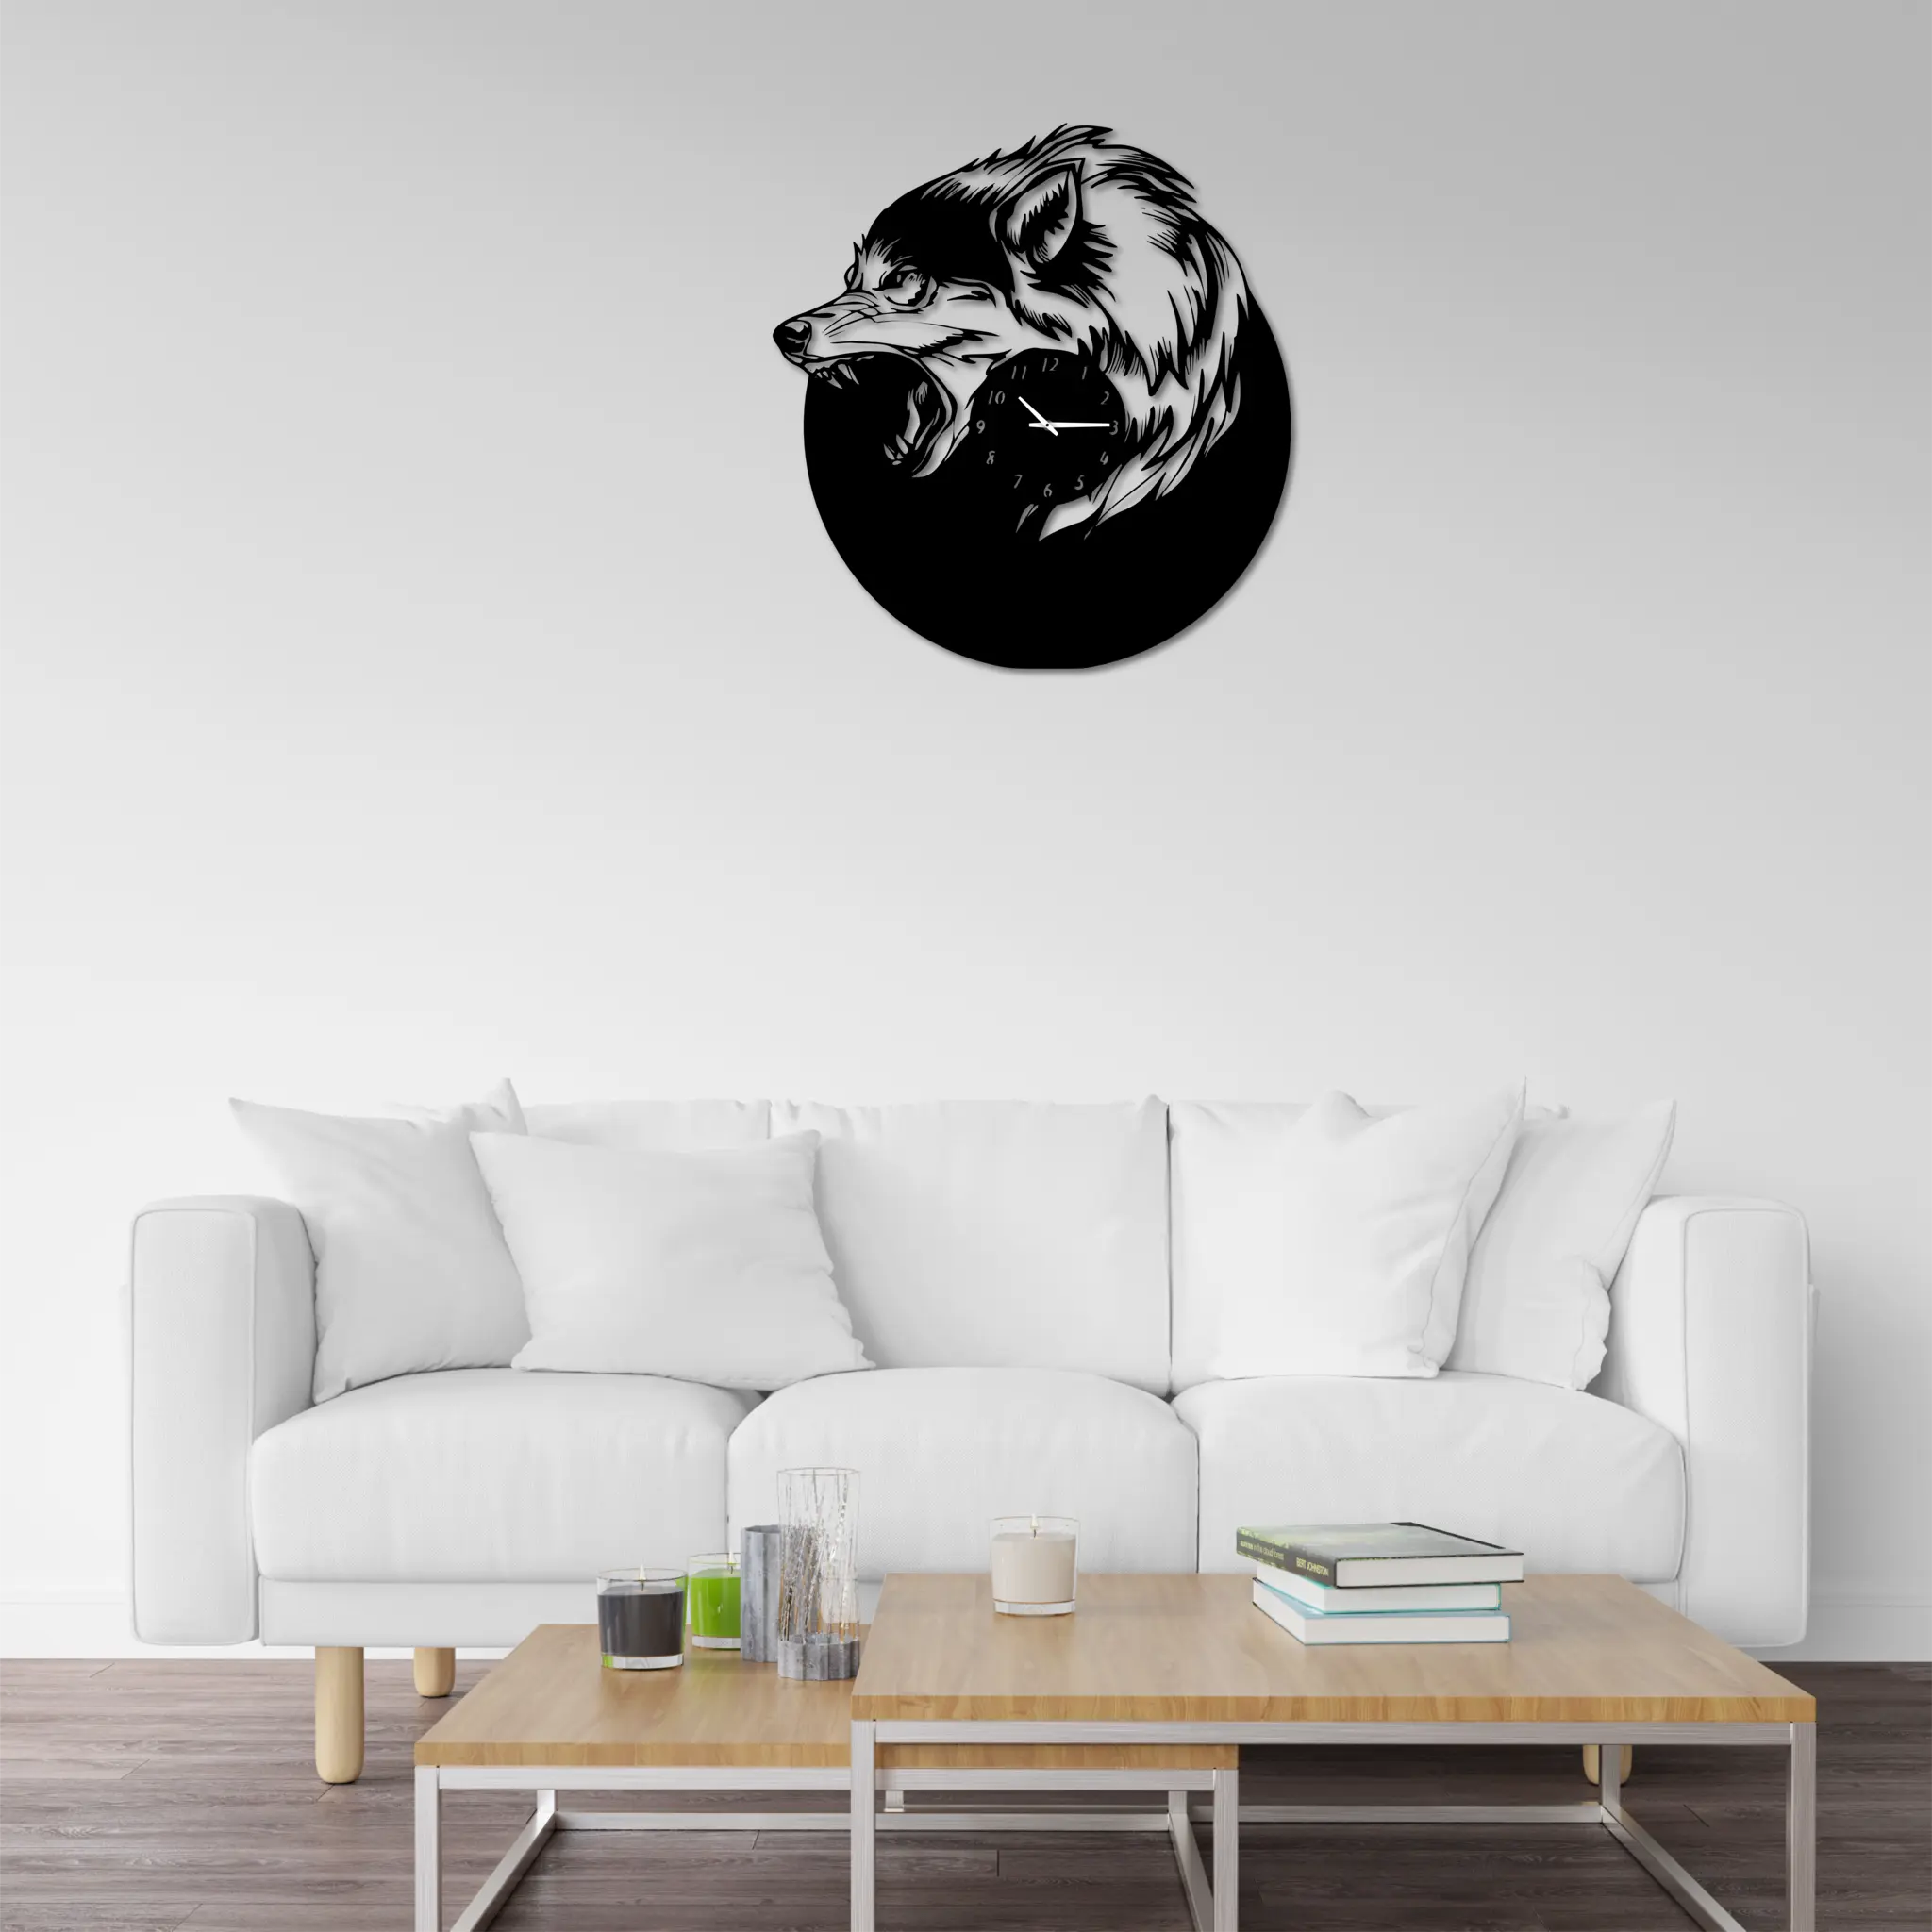 METAL Wall Clock with Wolves, Contemporary Black Clock, Wall-mounted Wolf Clock, Nature Lovers' Gift